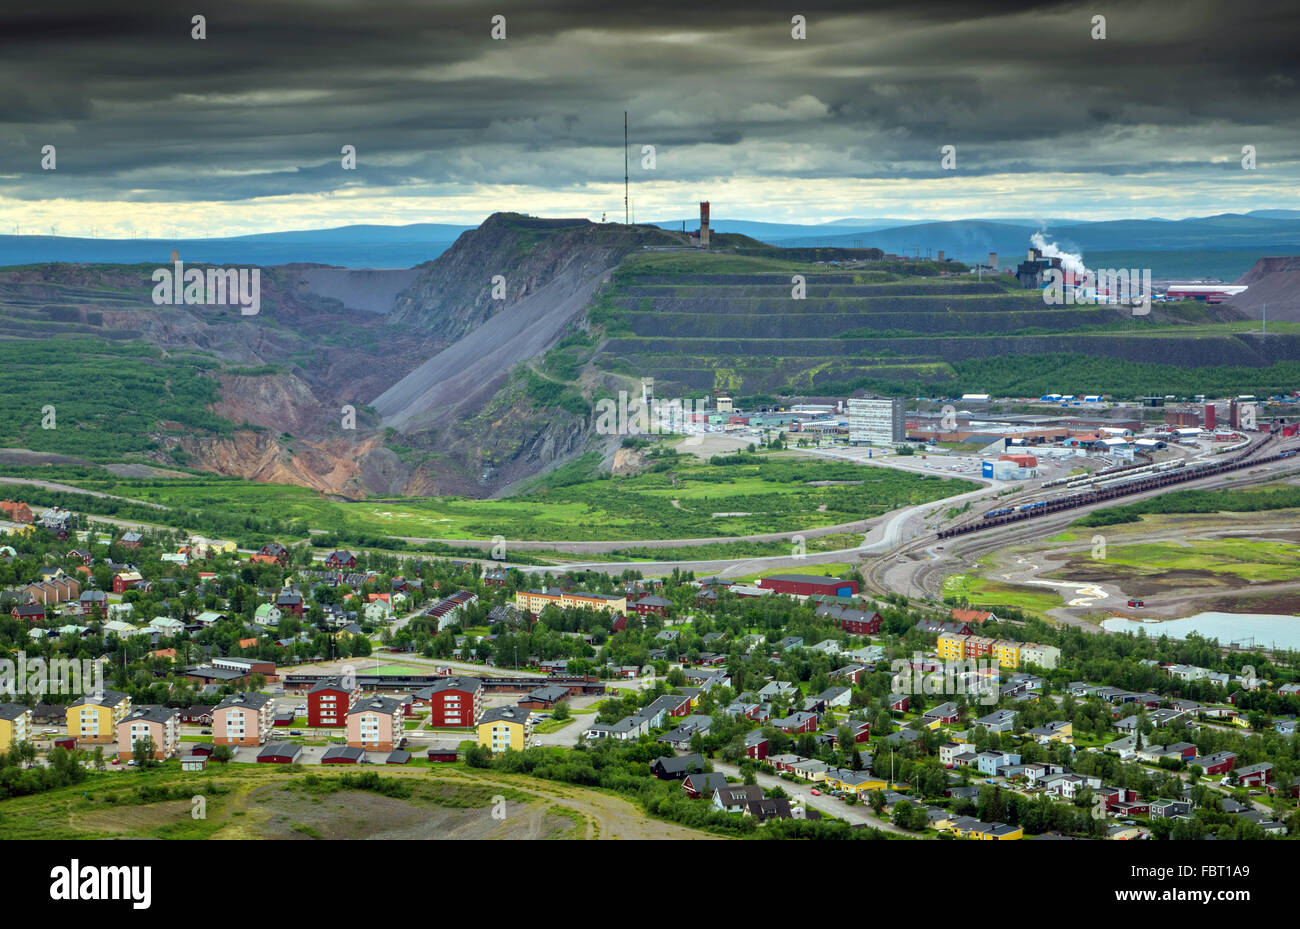 Sweden, Lapland, Kiruna, View of city and iron ore mountain in background Stock Photo